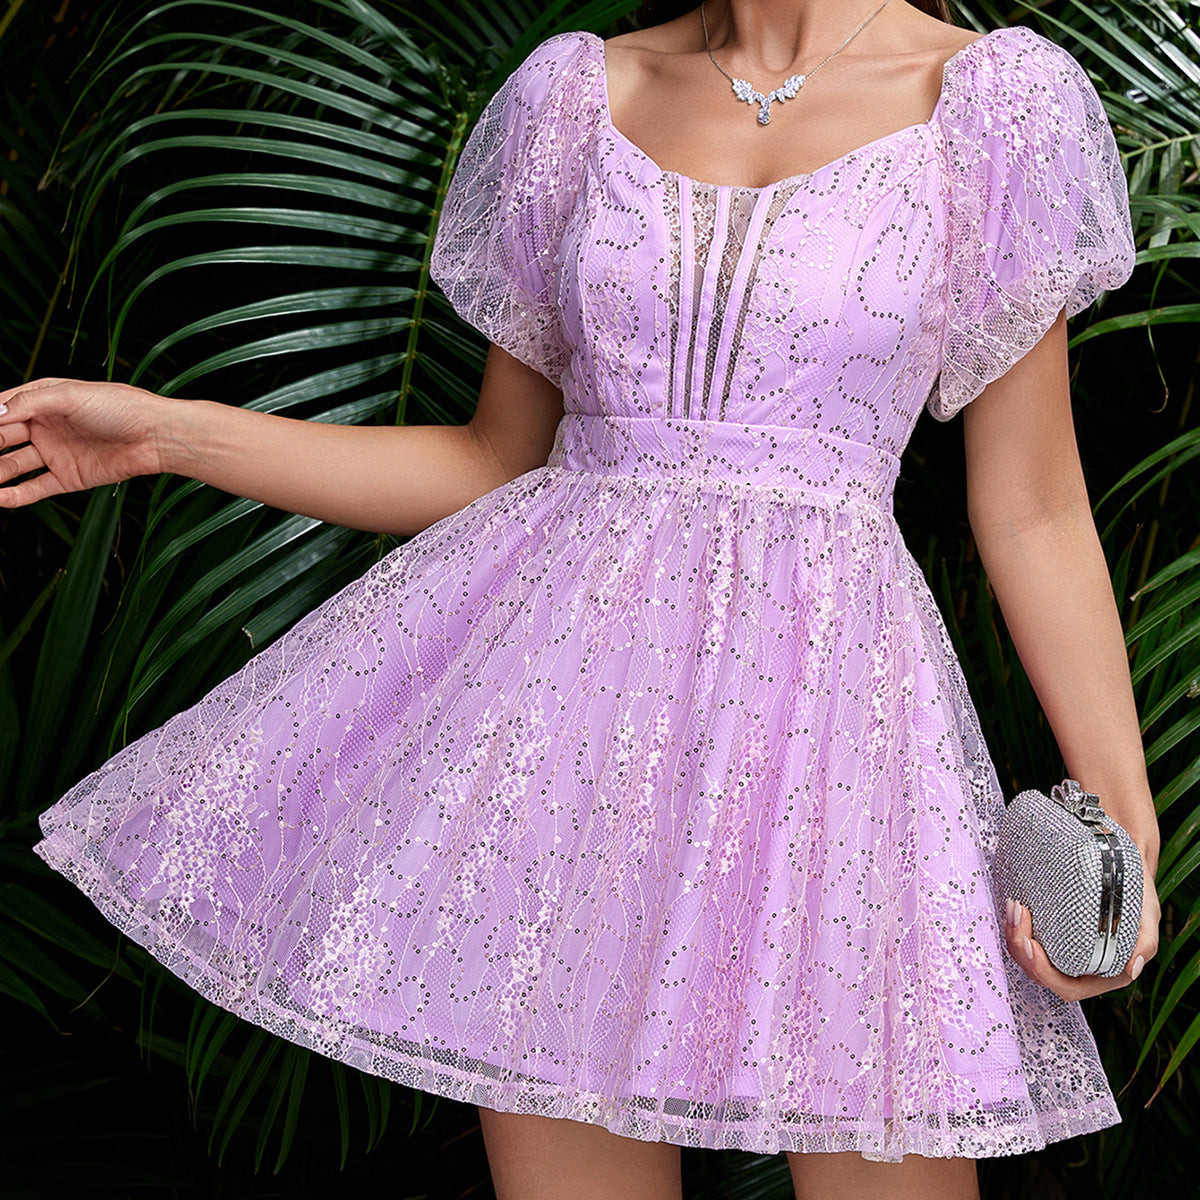 Hollow Out Cut Out Mesh Lace Puff Sleeve Dress